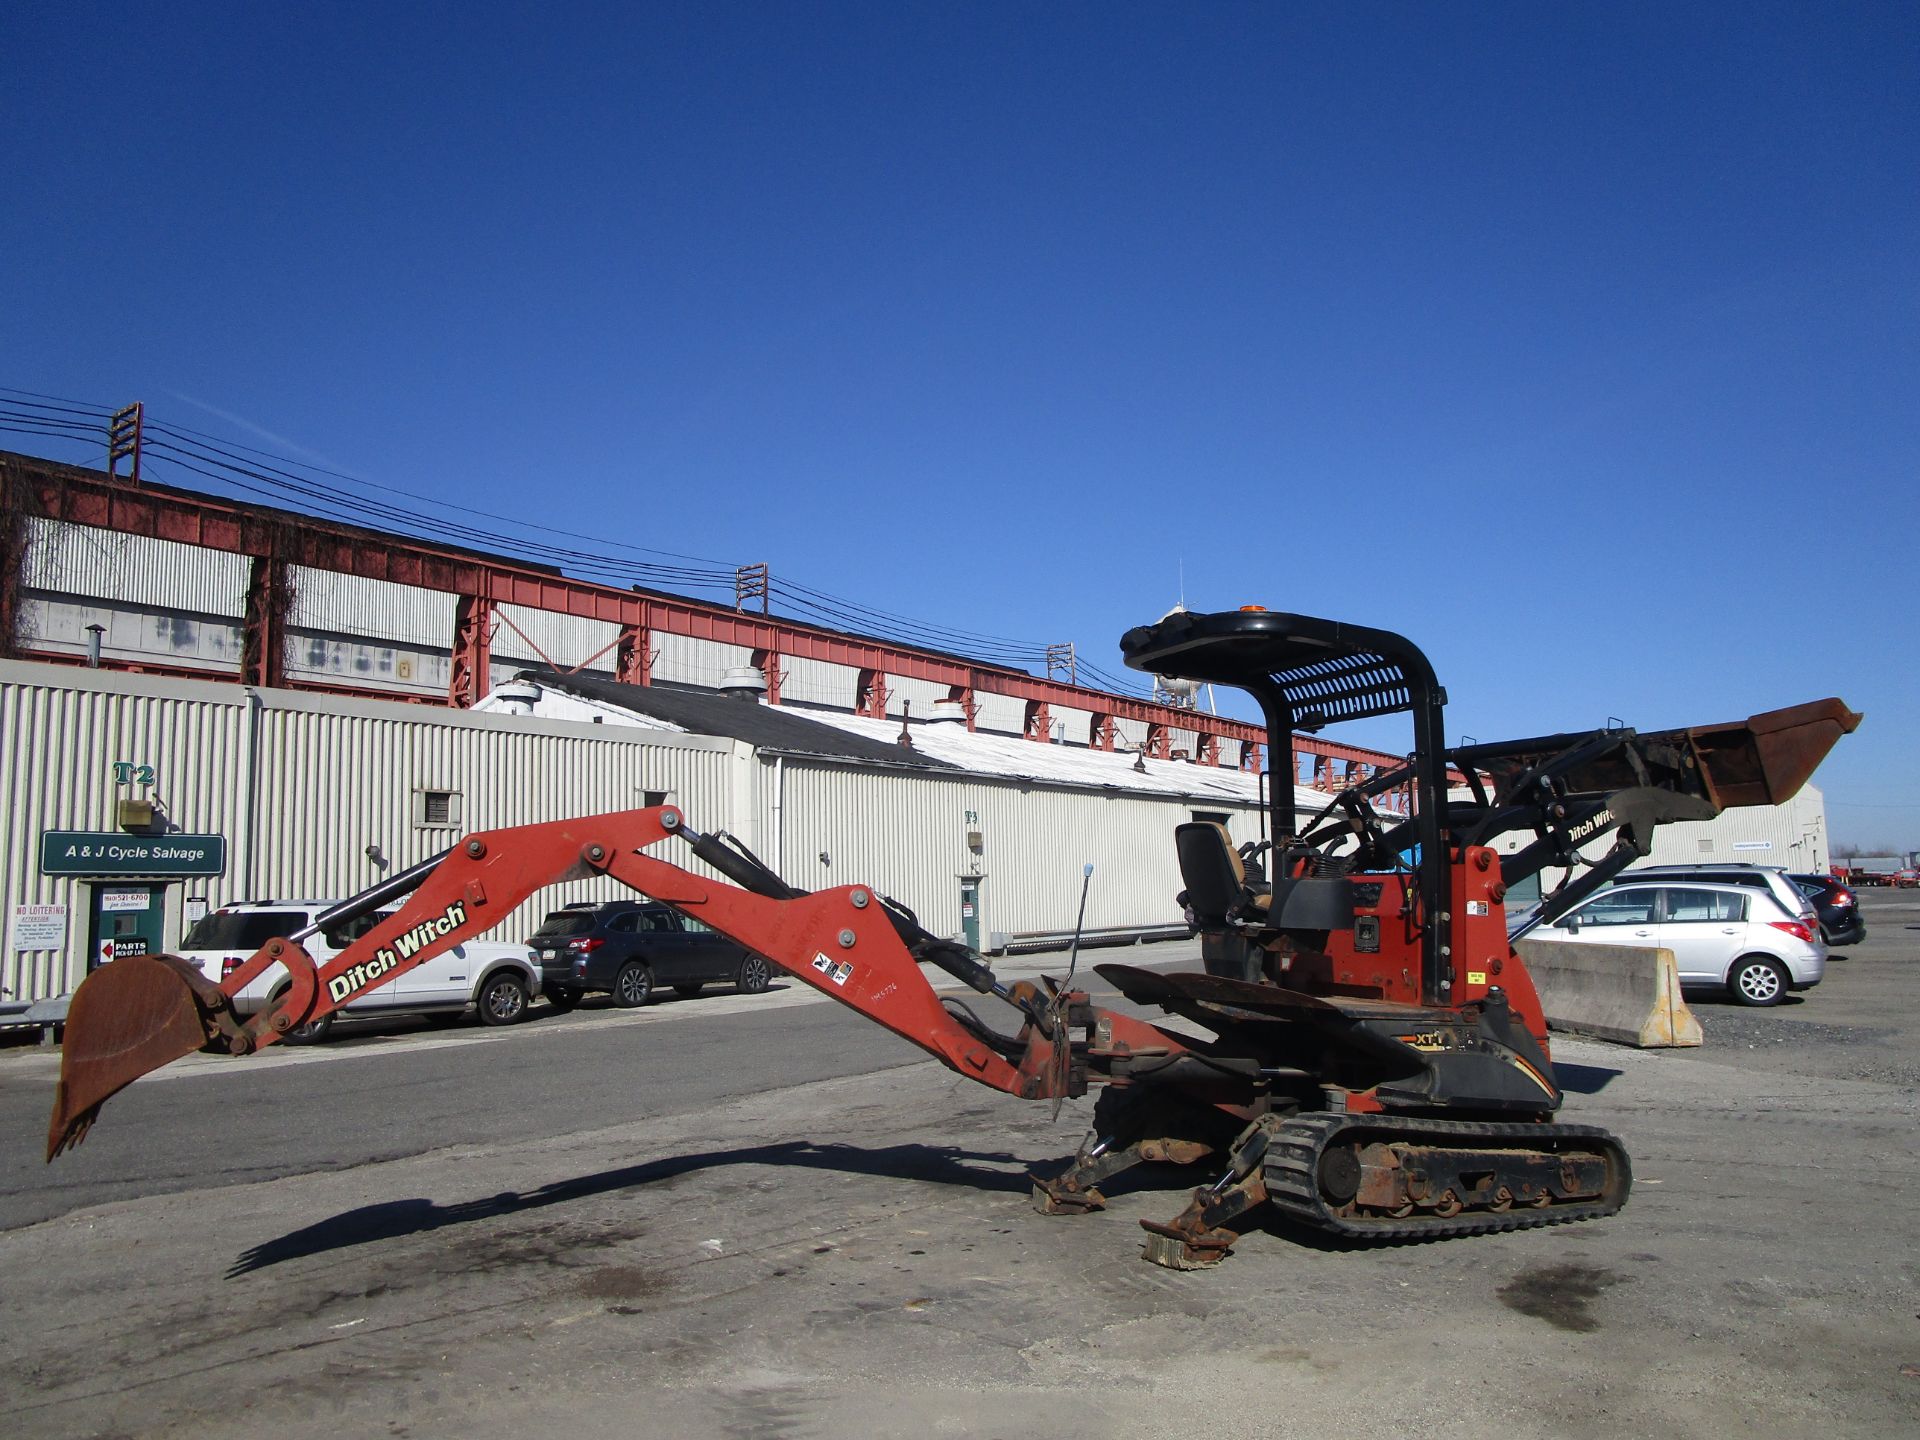 2011 Ditch Witch XT1600 Backhoe with Trailer and Attachments - Image 10 of 24